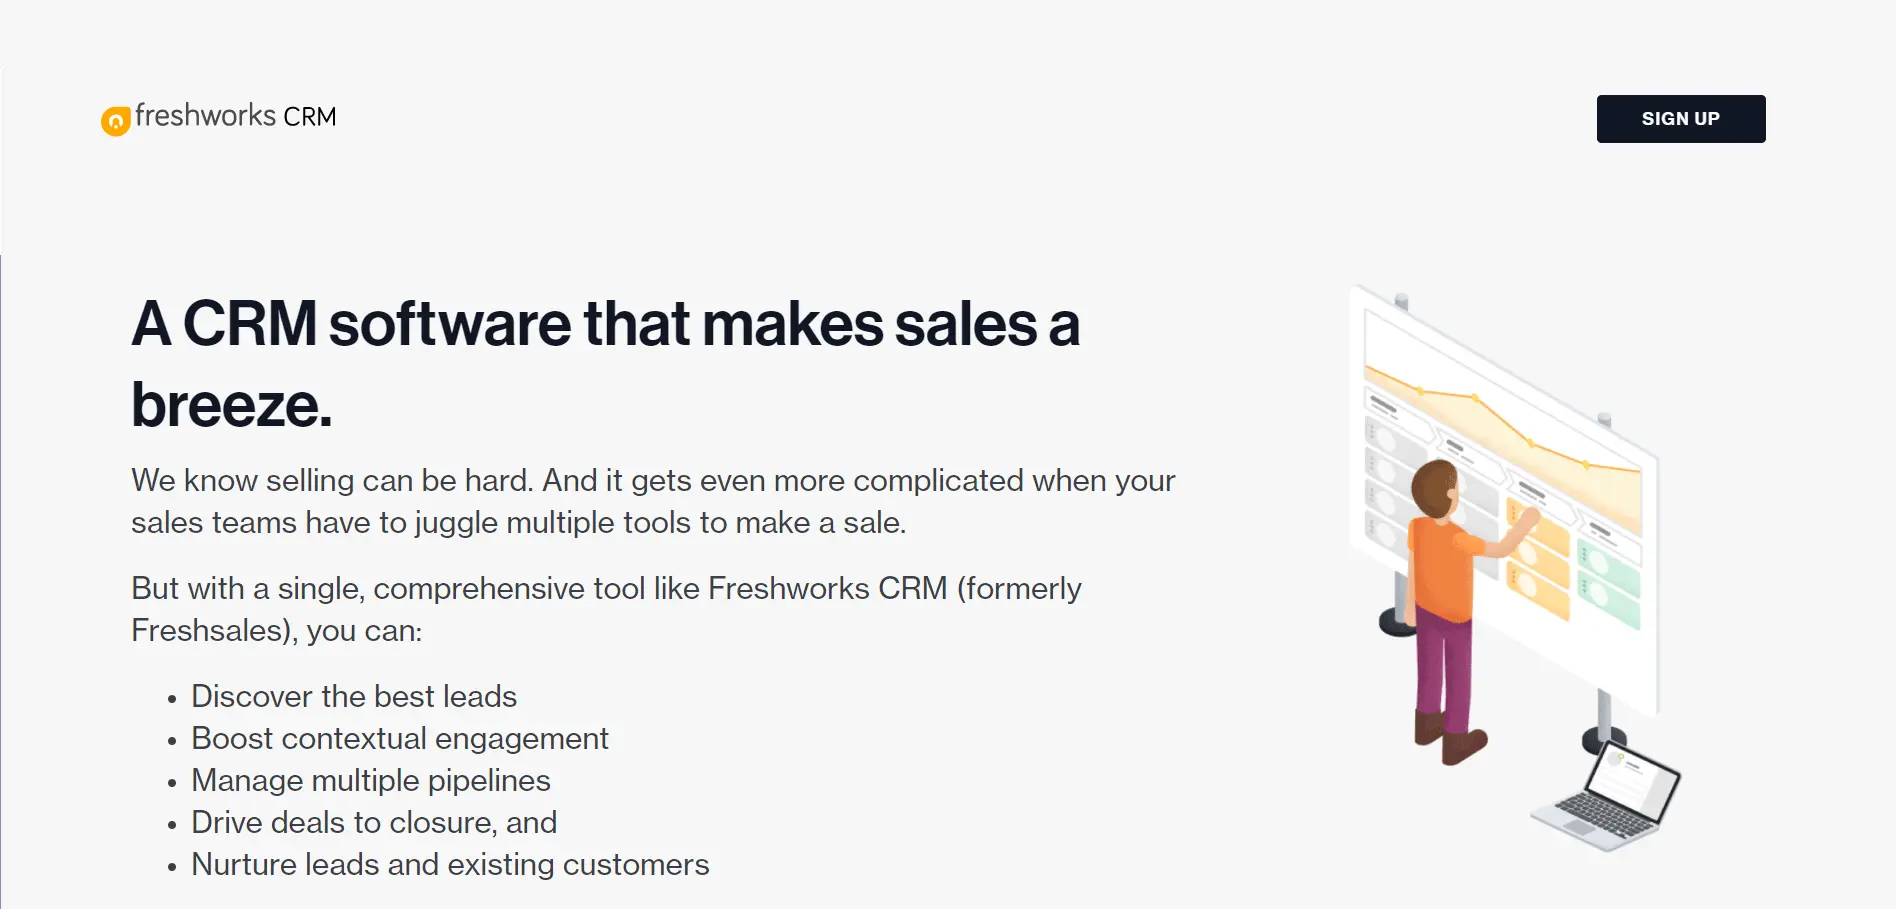 This is the screenshot of Freshworks CRM tool. It's parent company Freshworks Inc. was started in Chennai, India